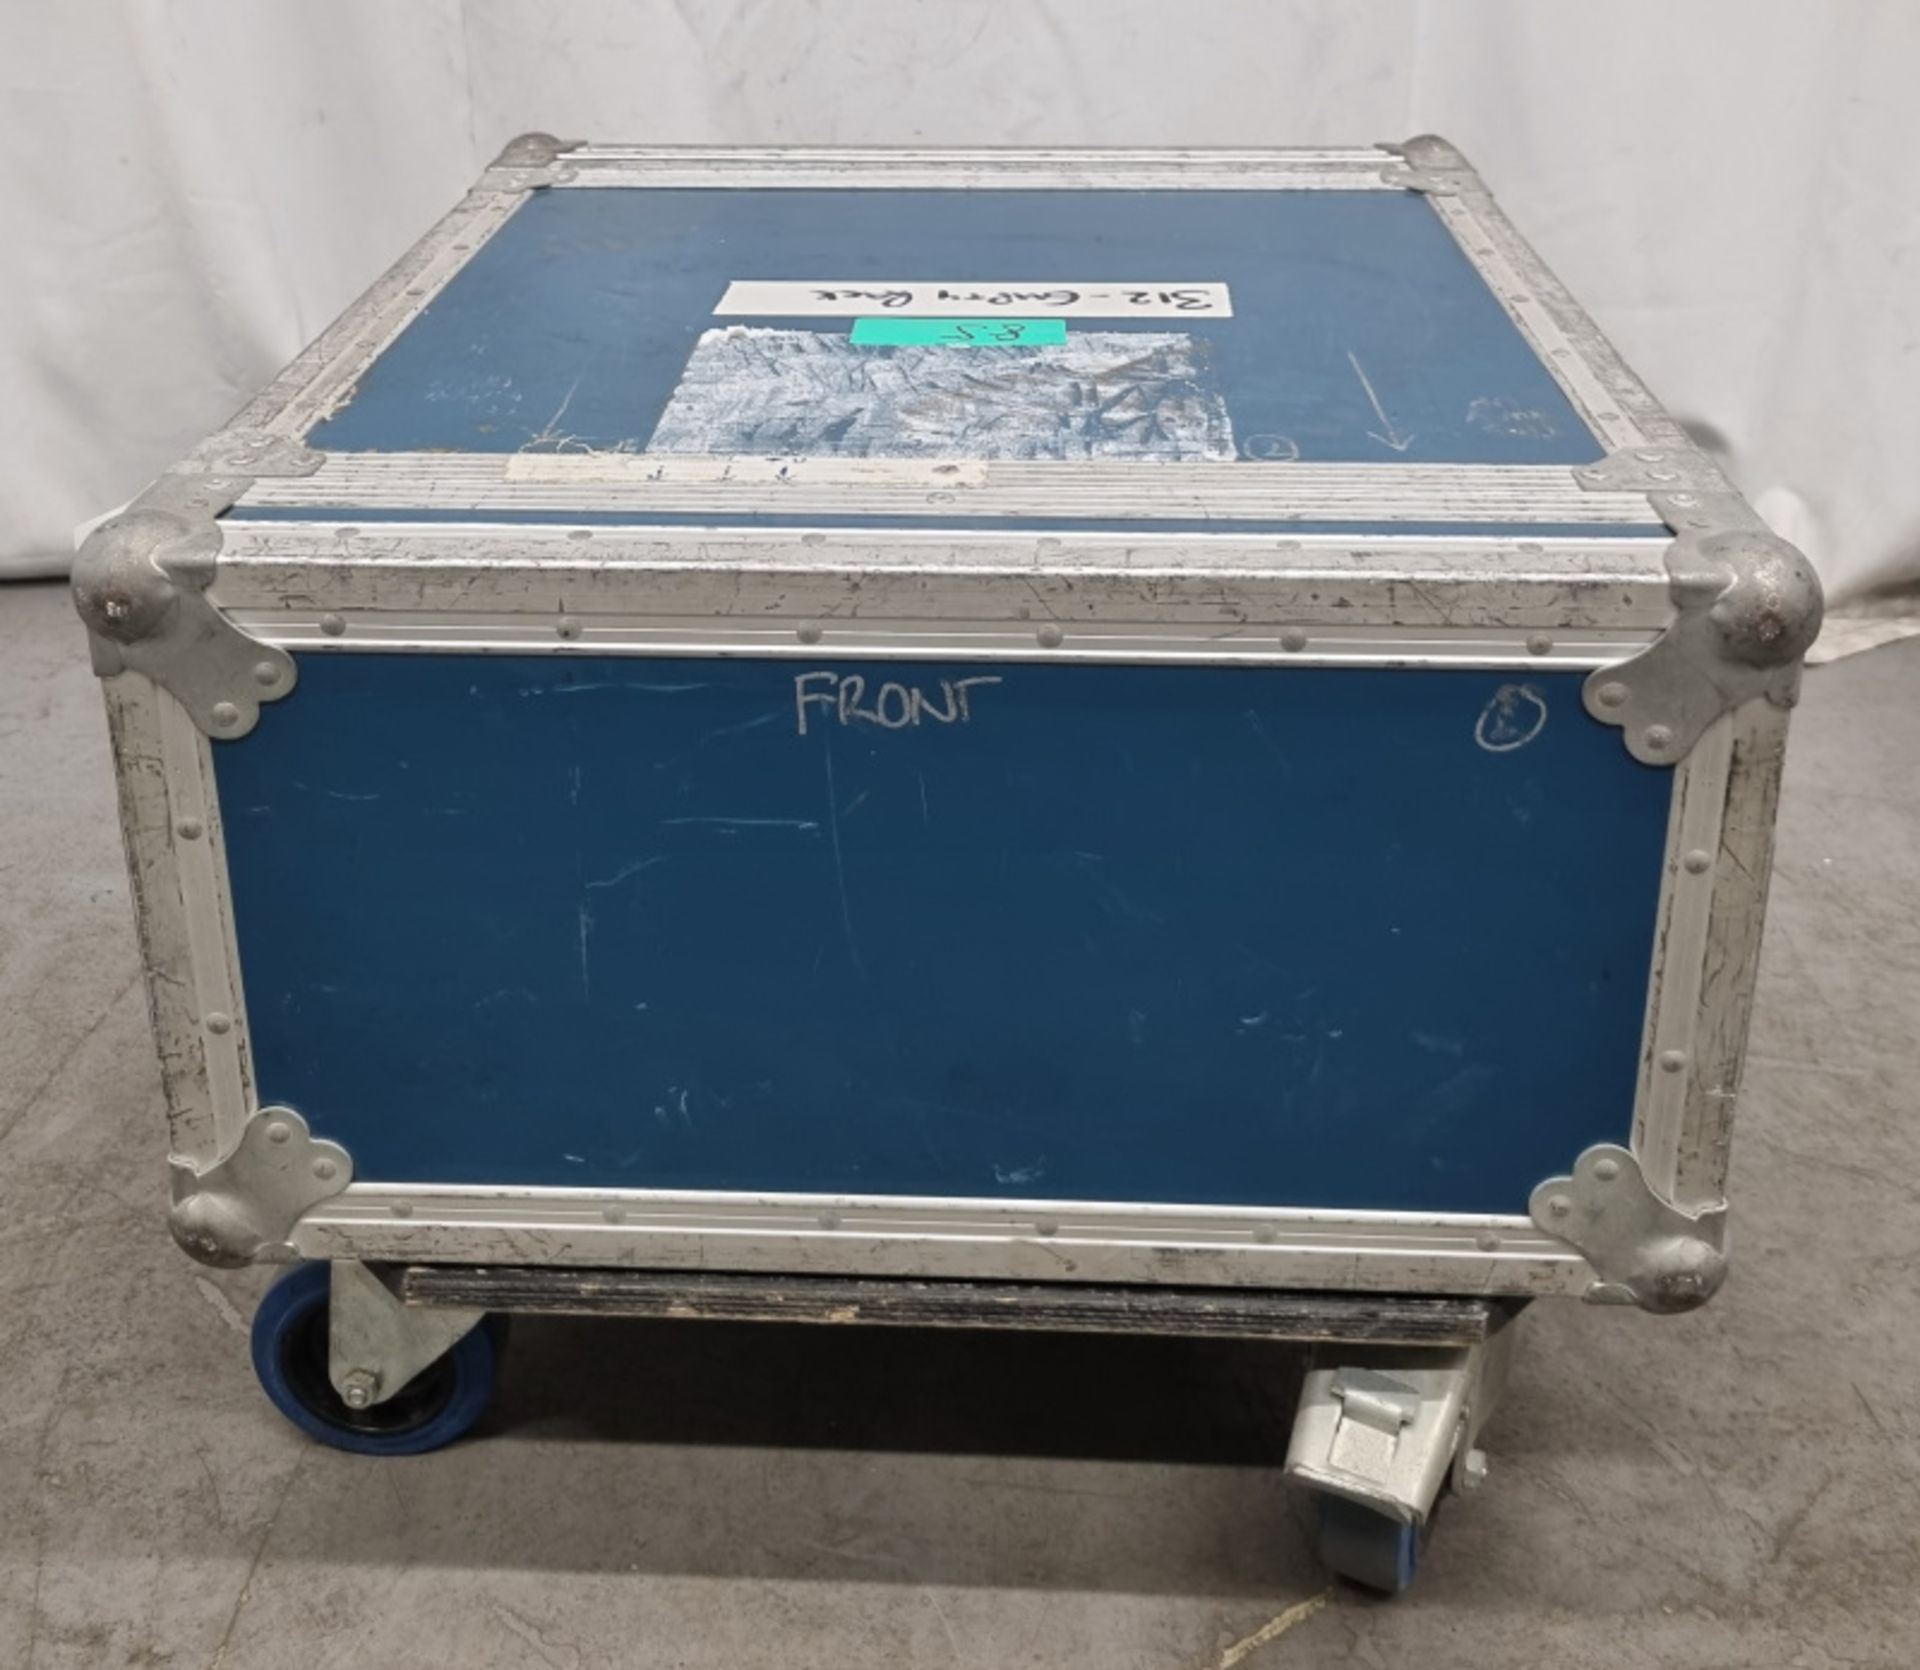 Empty Wheeled Flight case with internal rack - Dimensions L53.5 x W60 x H43cm (including wheels) - Image 2 of 5